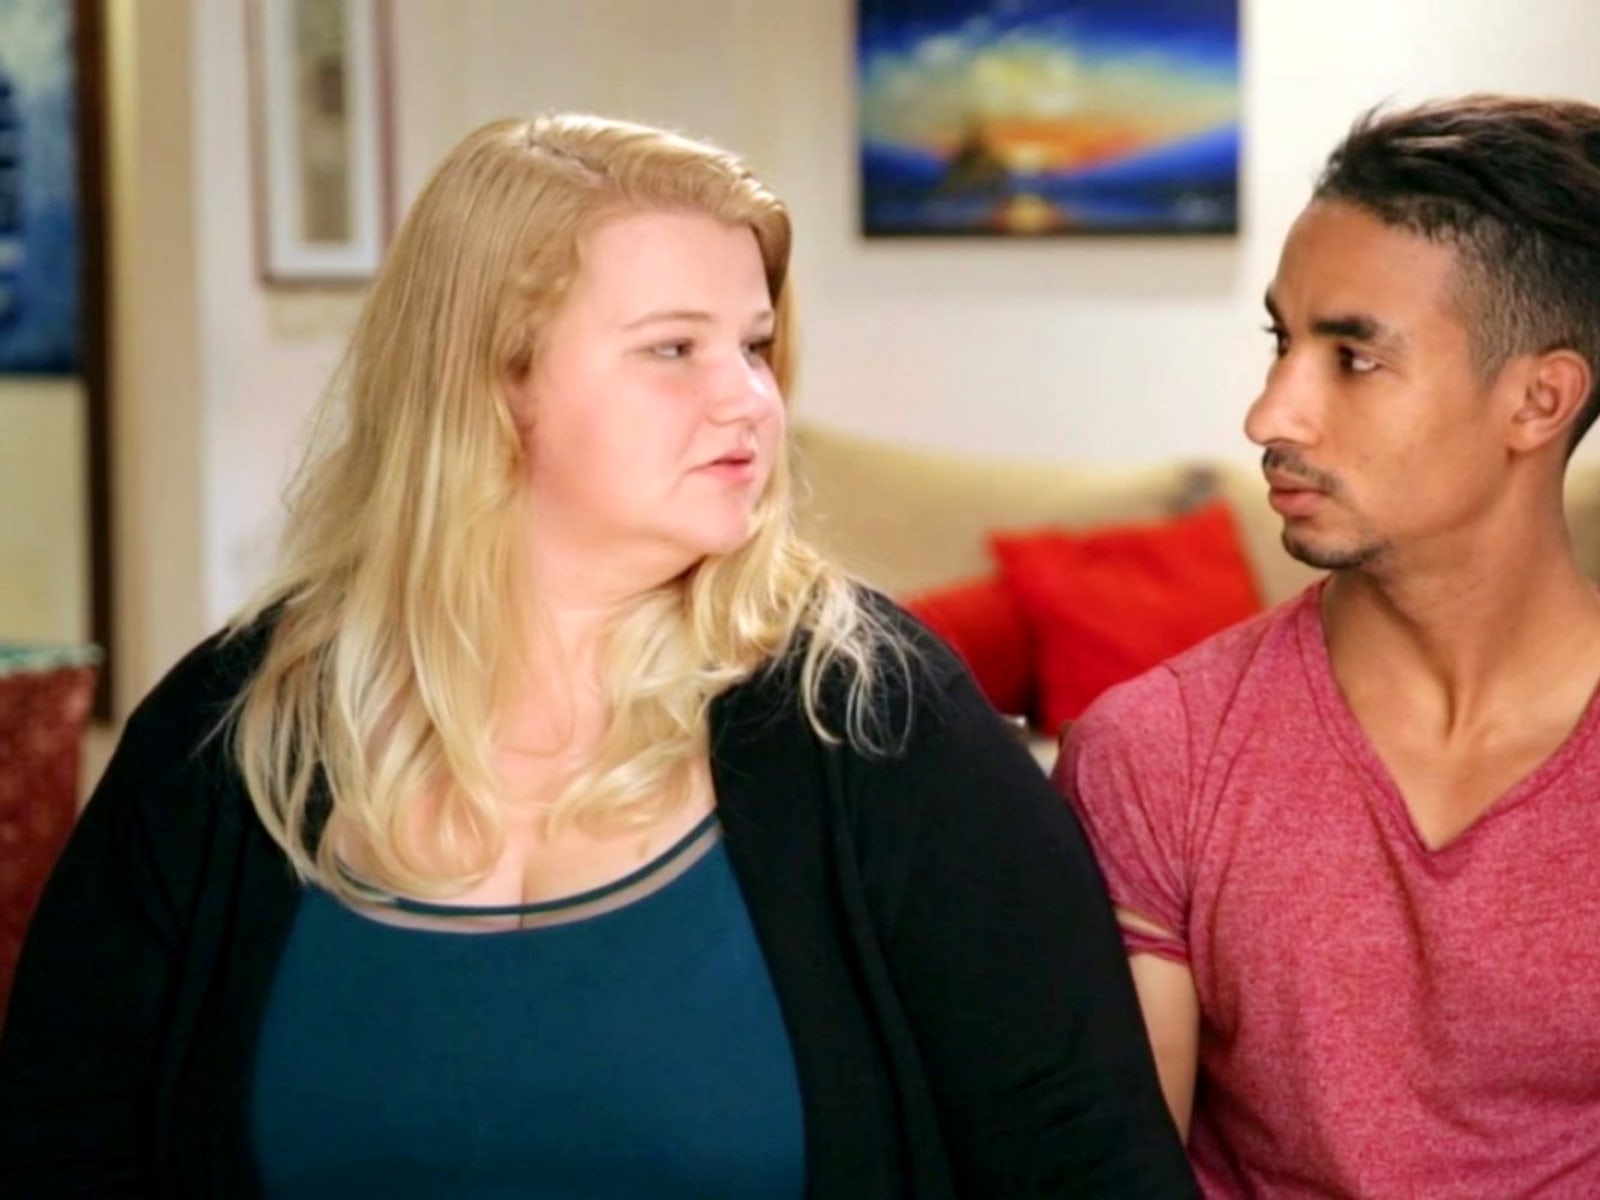 90 Day Fiance Couple Nicole Nafziger And Azan Tefou Have Officially Broken Up We Werent 